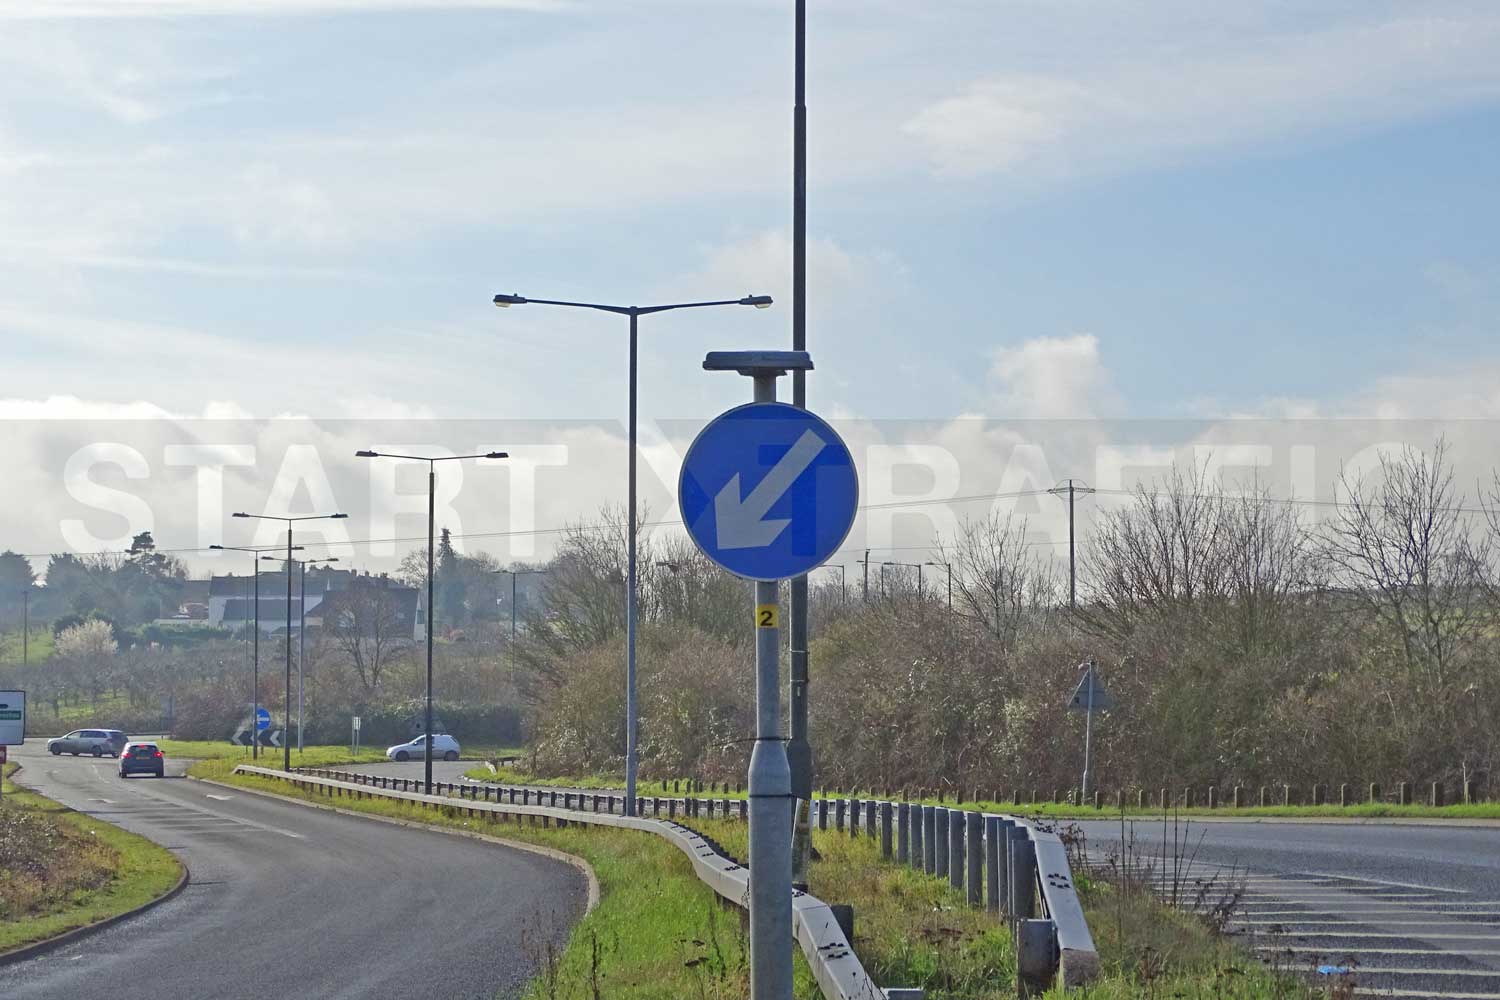 Keep Left sign installed on Duel carriageway